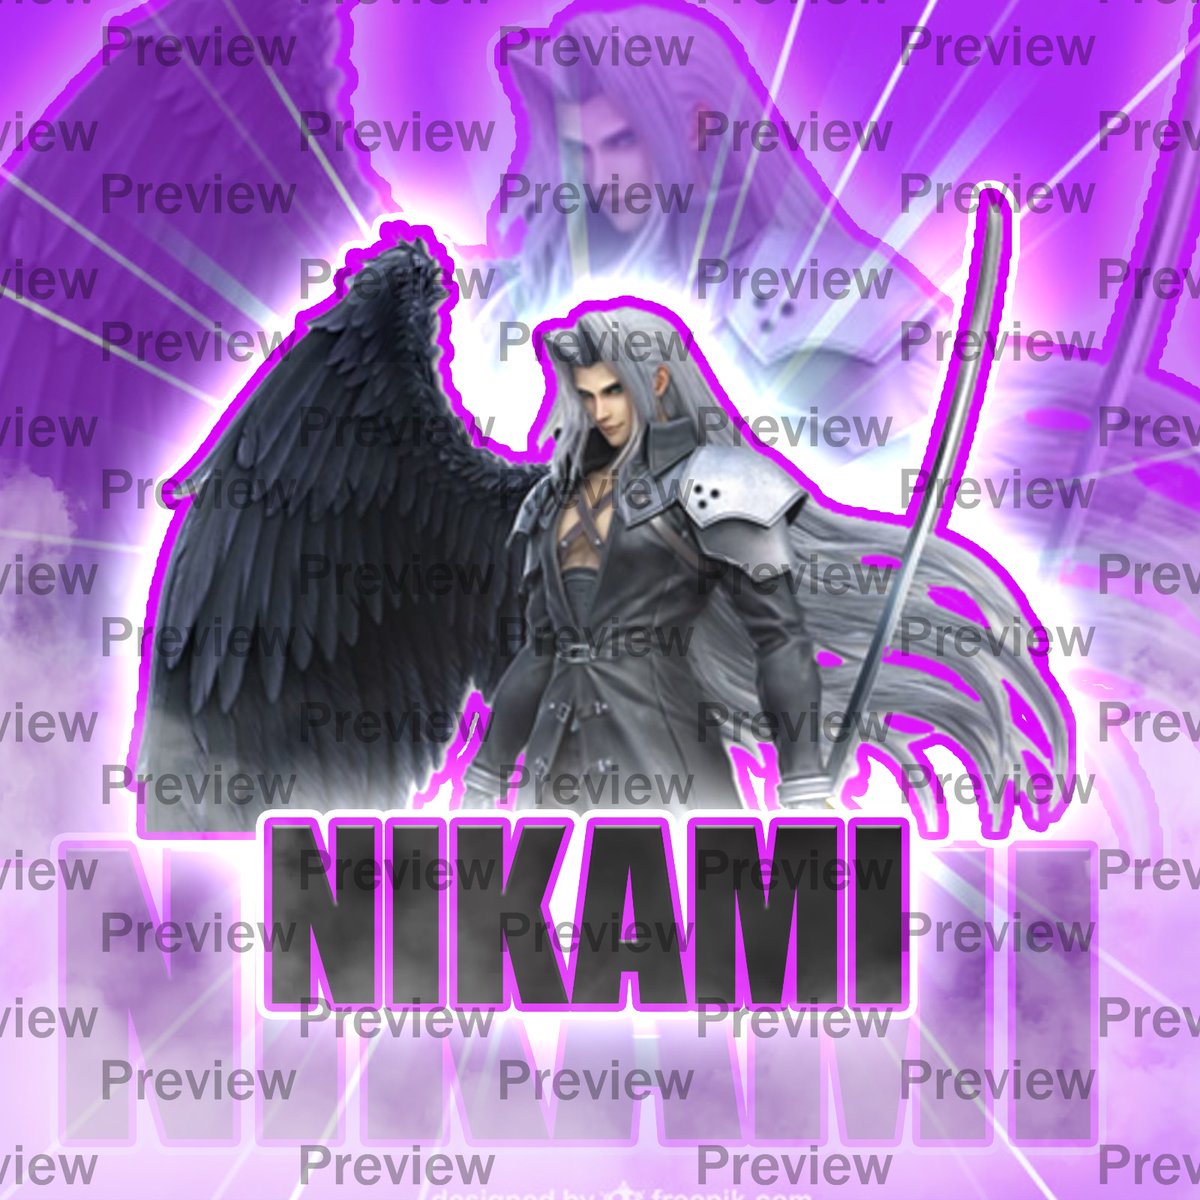 Another satisfied client @NiKamiSephiroth If anyone need dope quality work done in reasonable price so kindly hit my DMs. #NFTs #NFTartist #logo #banner #twitch #art #twitchaffiliate #smallstreamer #SmallStreamersConnect @Retweelgend @rtsmallstreams @wwwanpaus @DripRT @SGH_R